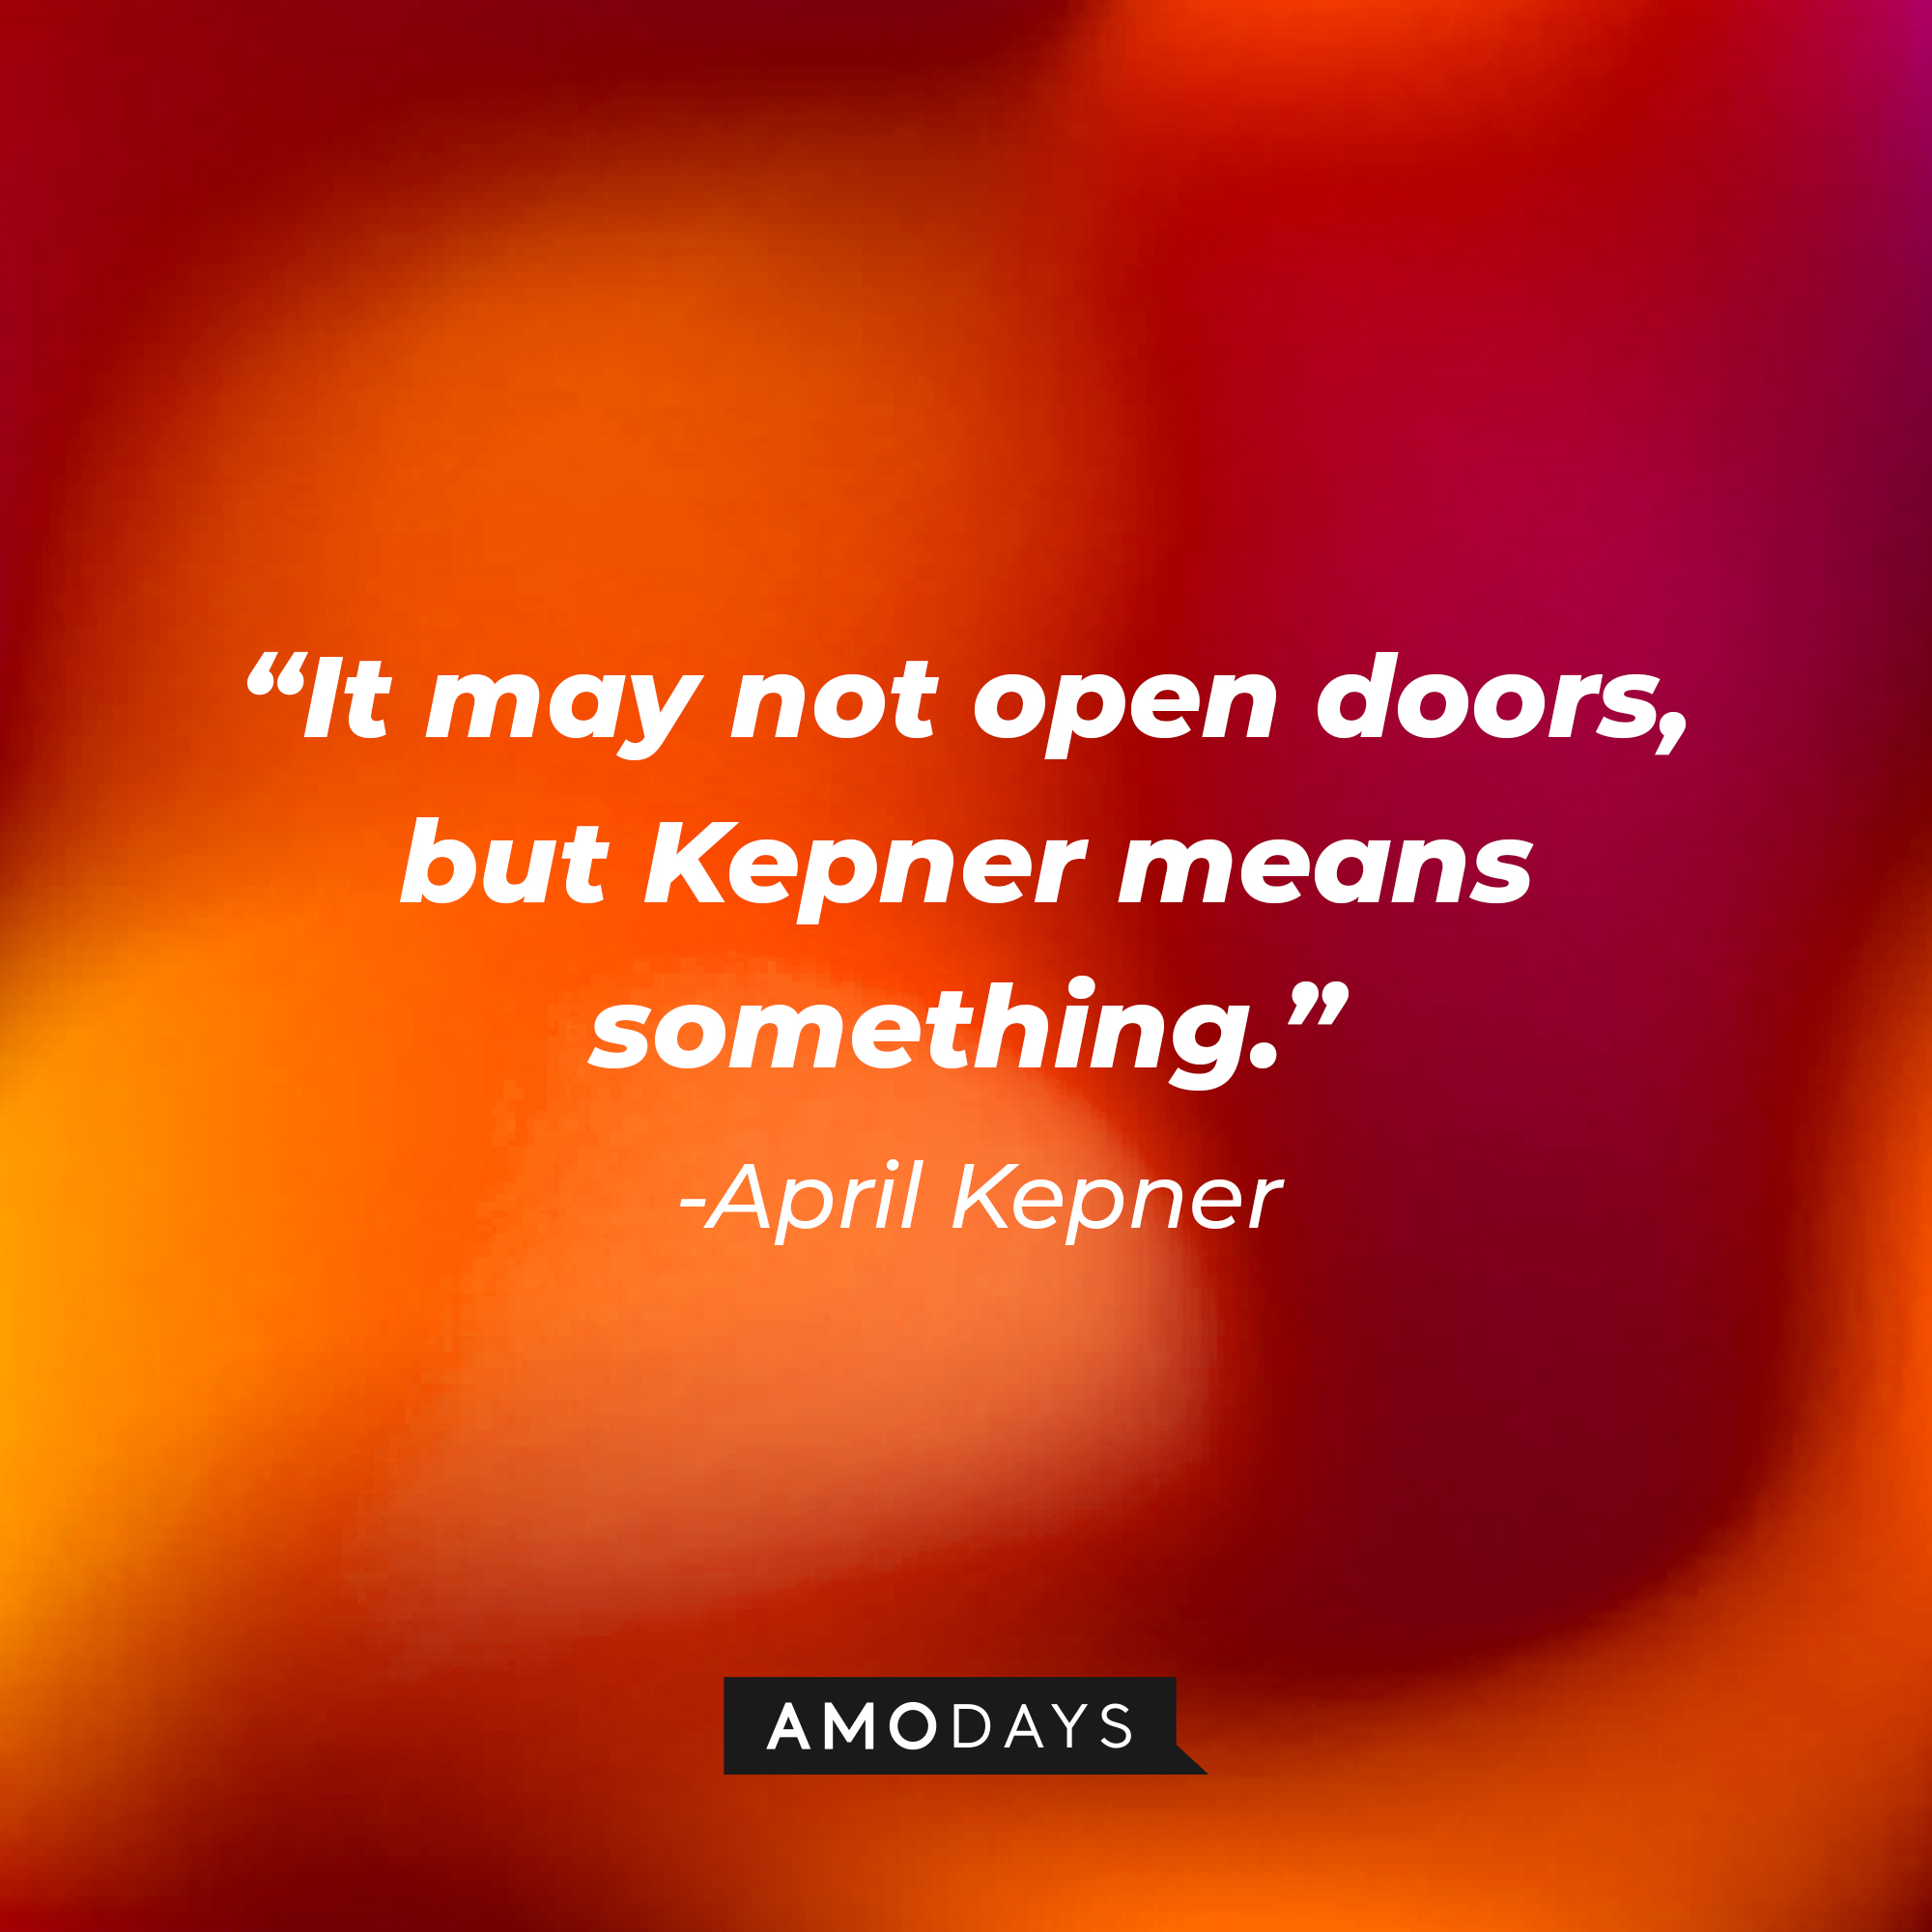 April Kepner's quote: "It may not open doors, but Kepner means something." | Source: AmoDays